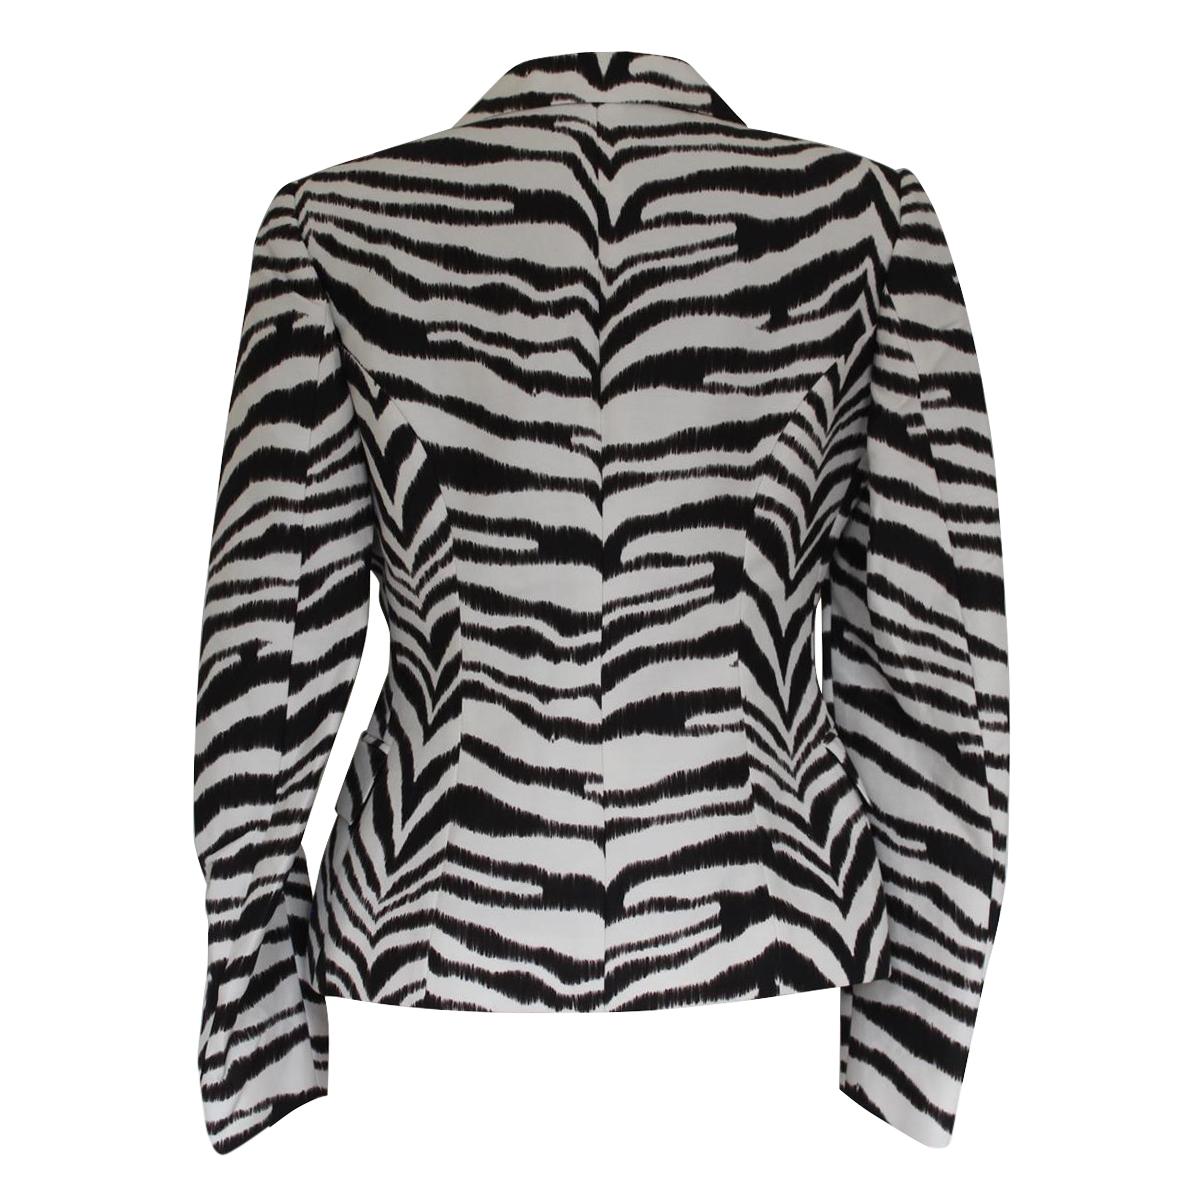 Super chic Ungaro jacket
Cotton (60%) Rayon
Black and white color
Zebra print
Automatic buttons closure
Two pockets
Length shoulder/hem cm 53 (20.8 inches)
Shoulder length cm 39 (15.3 inches)
WORLDWIDE EXPRESS SHIPPING INCLUDED IN THE PRICE !